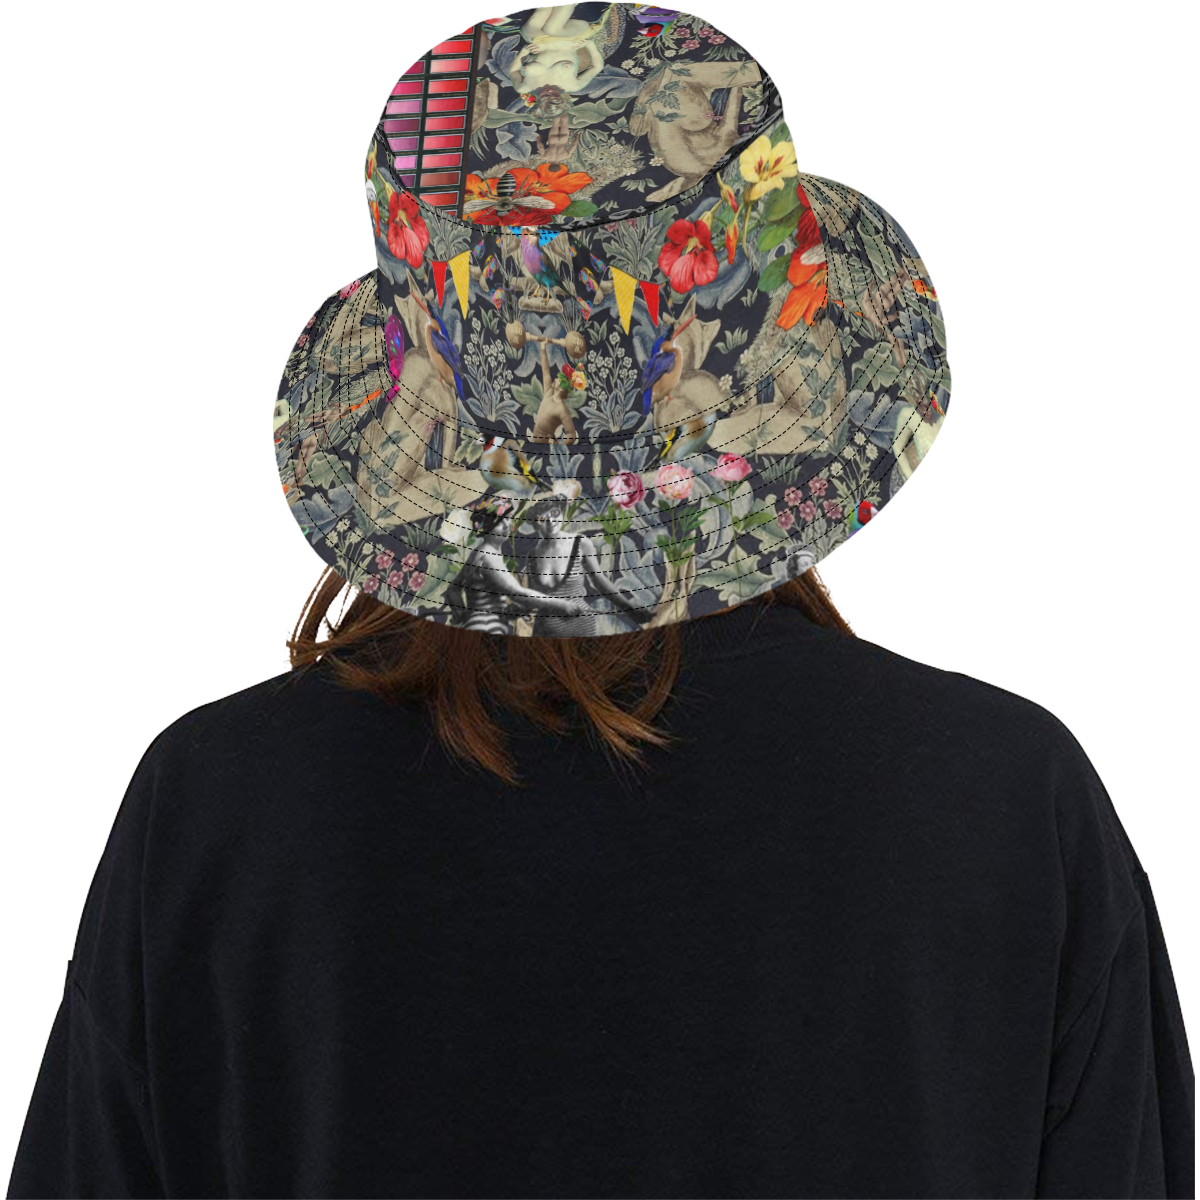 May I Just Add? All Over Print Bucket Hat